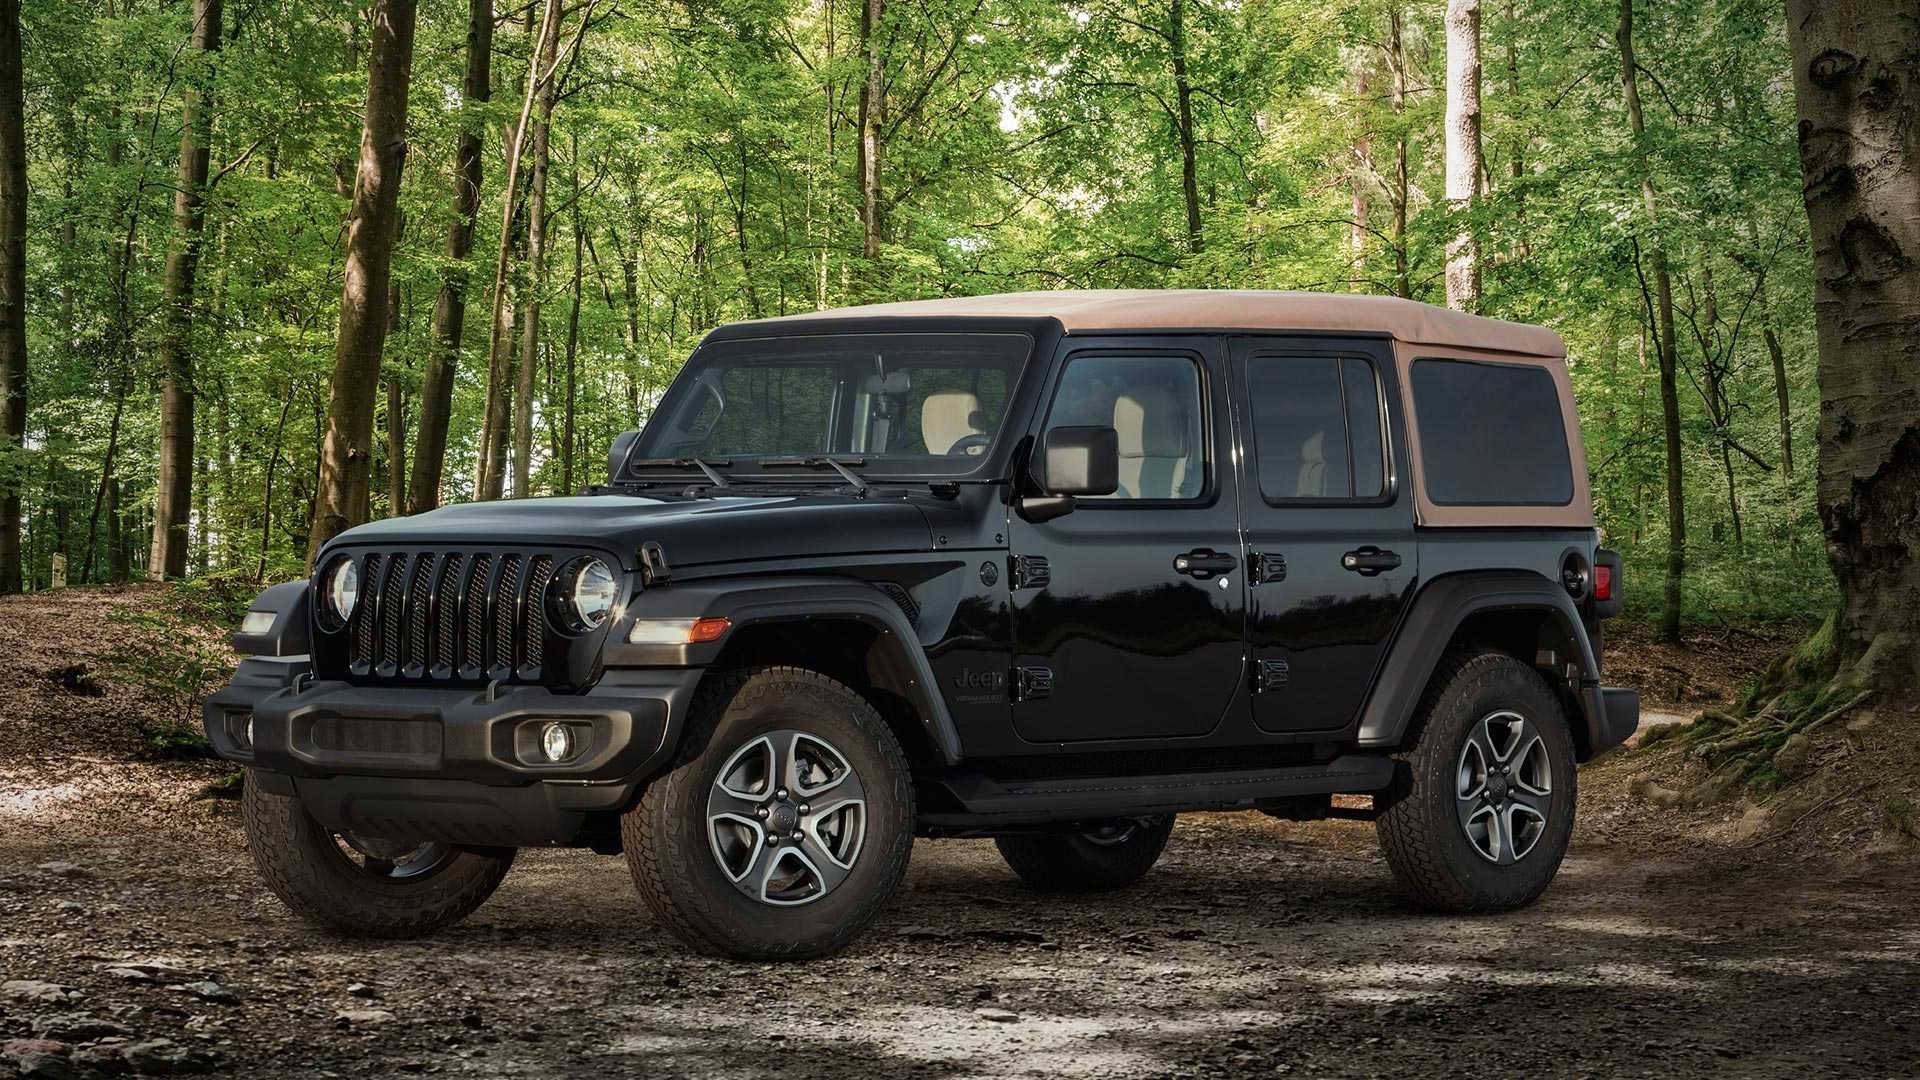 Bold And Ready: The Black Jeep Suv Background